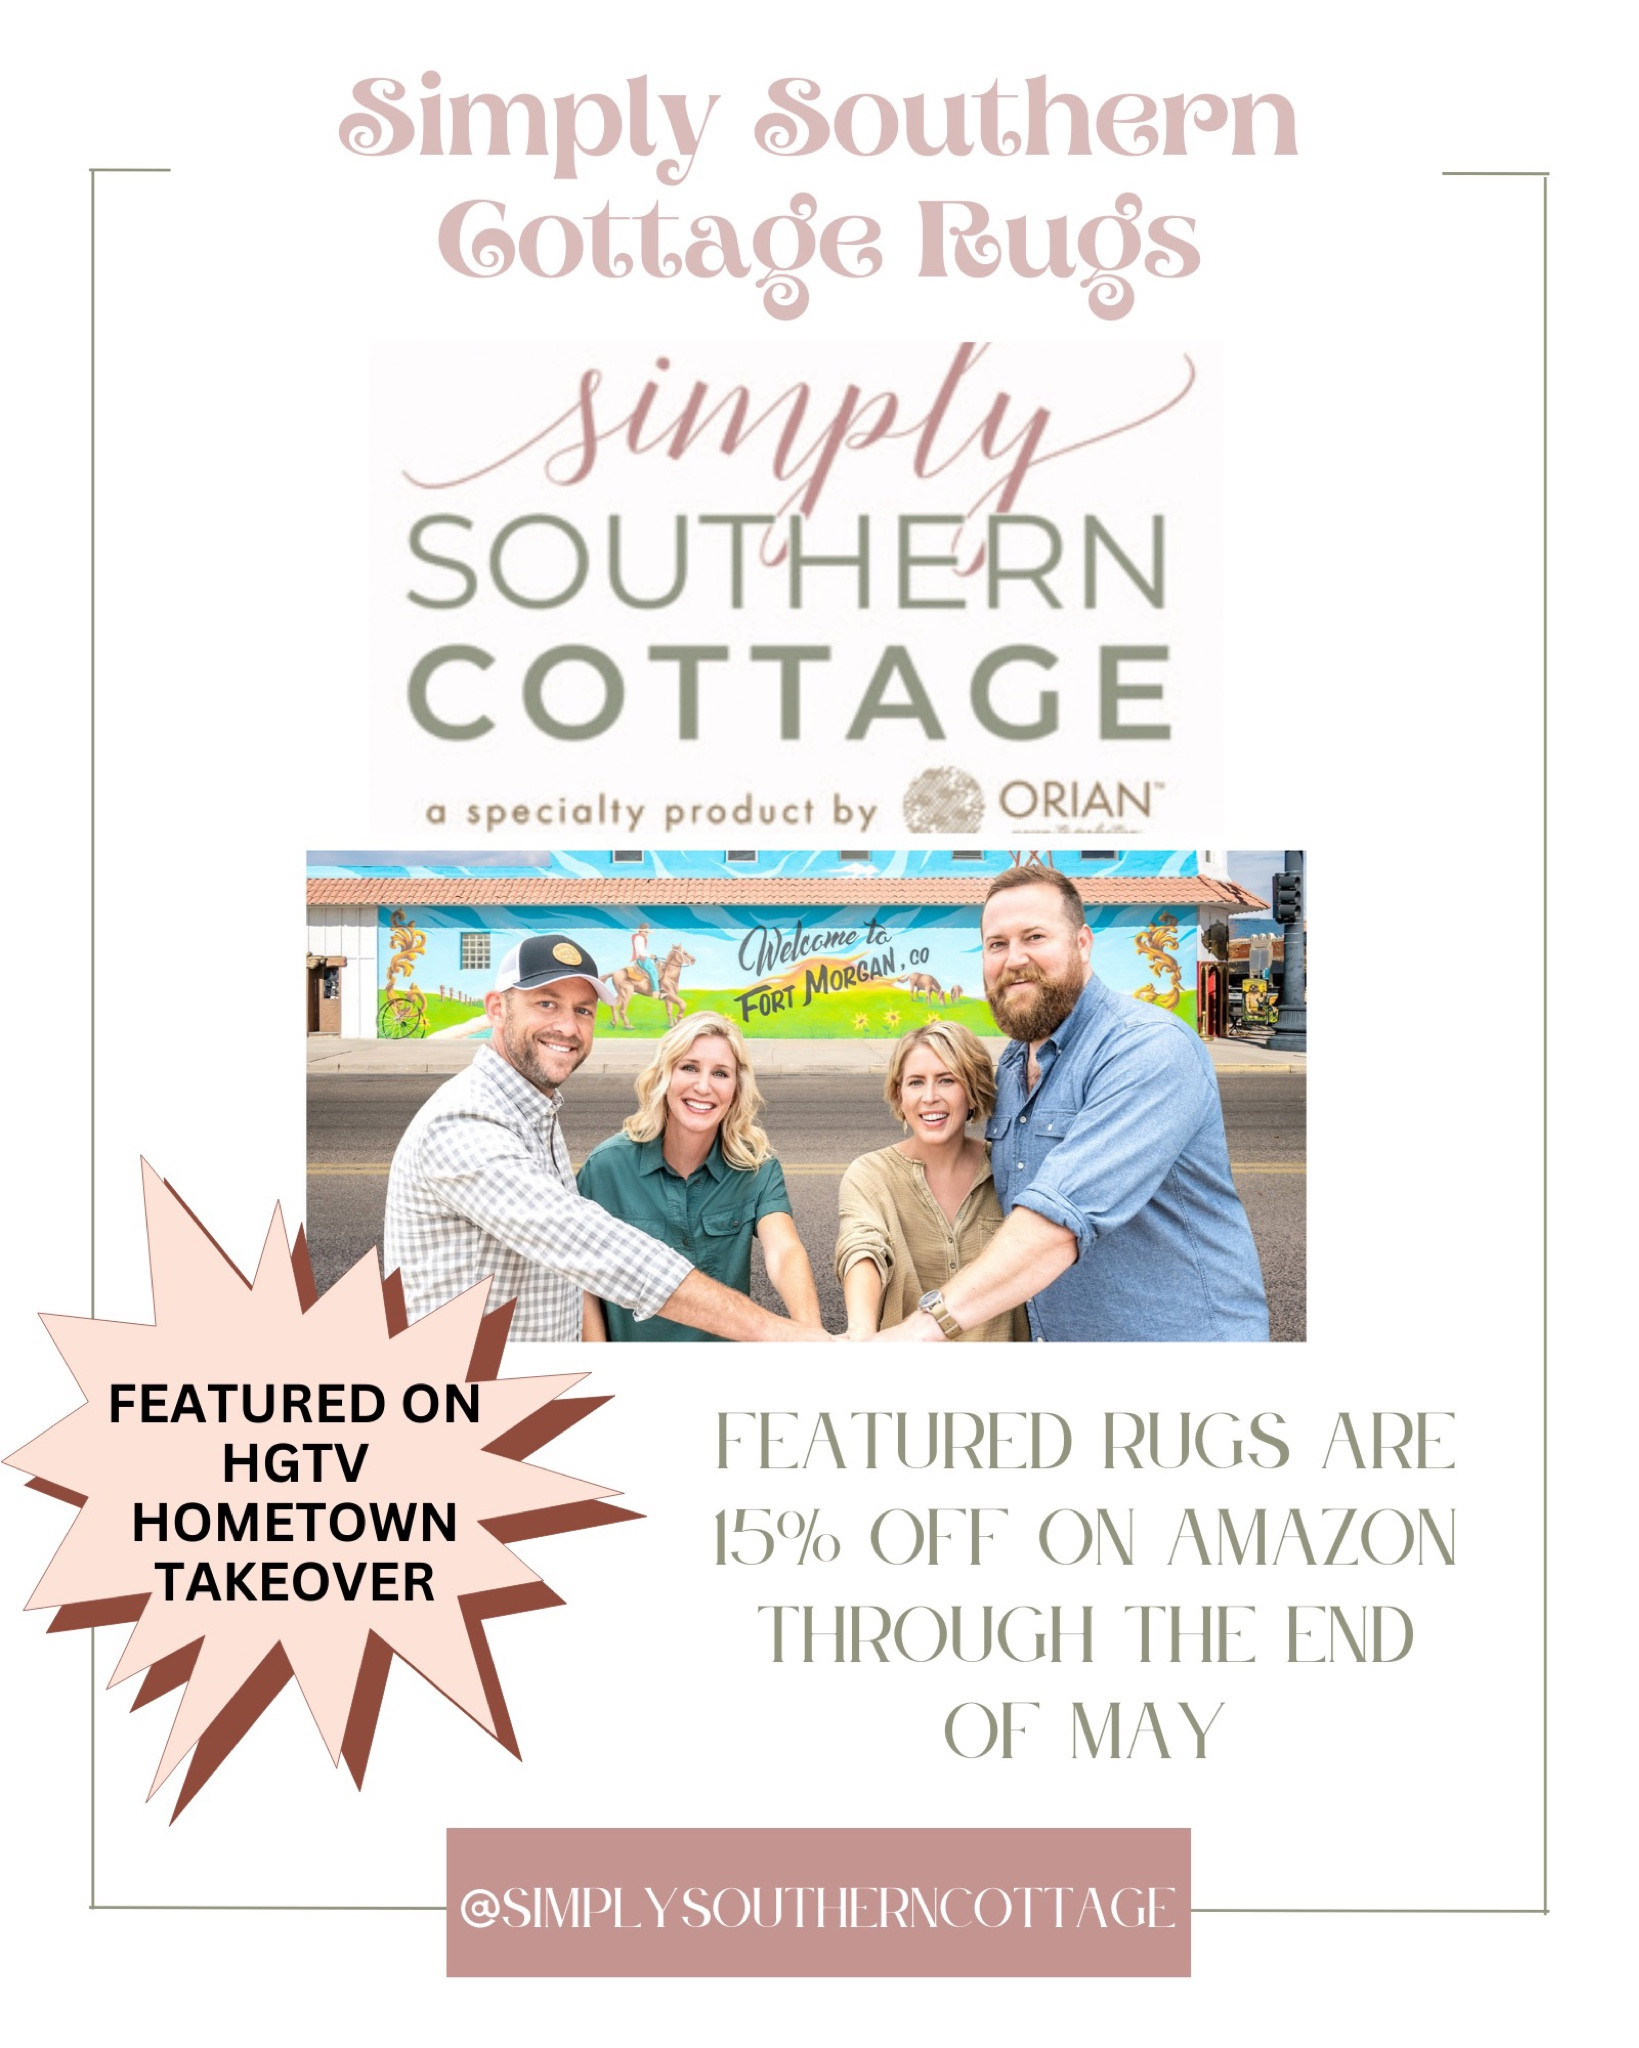 Stocking Stuffers for the Holidays - Simply Southern Cottage